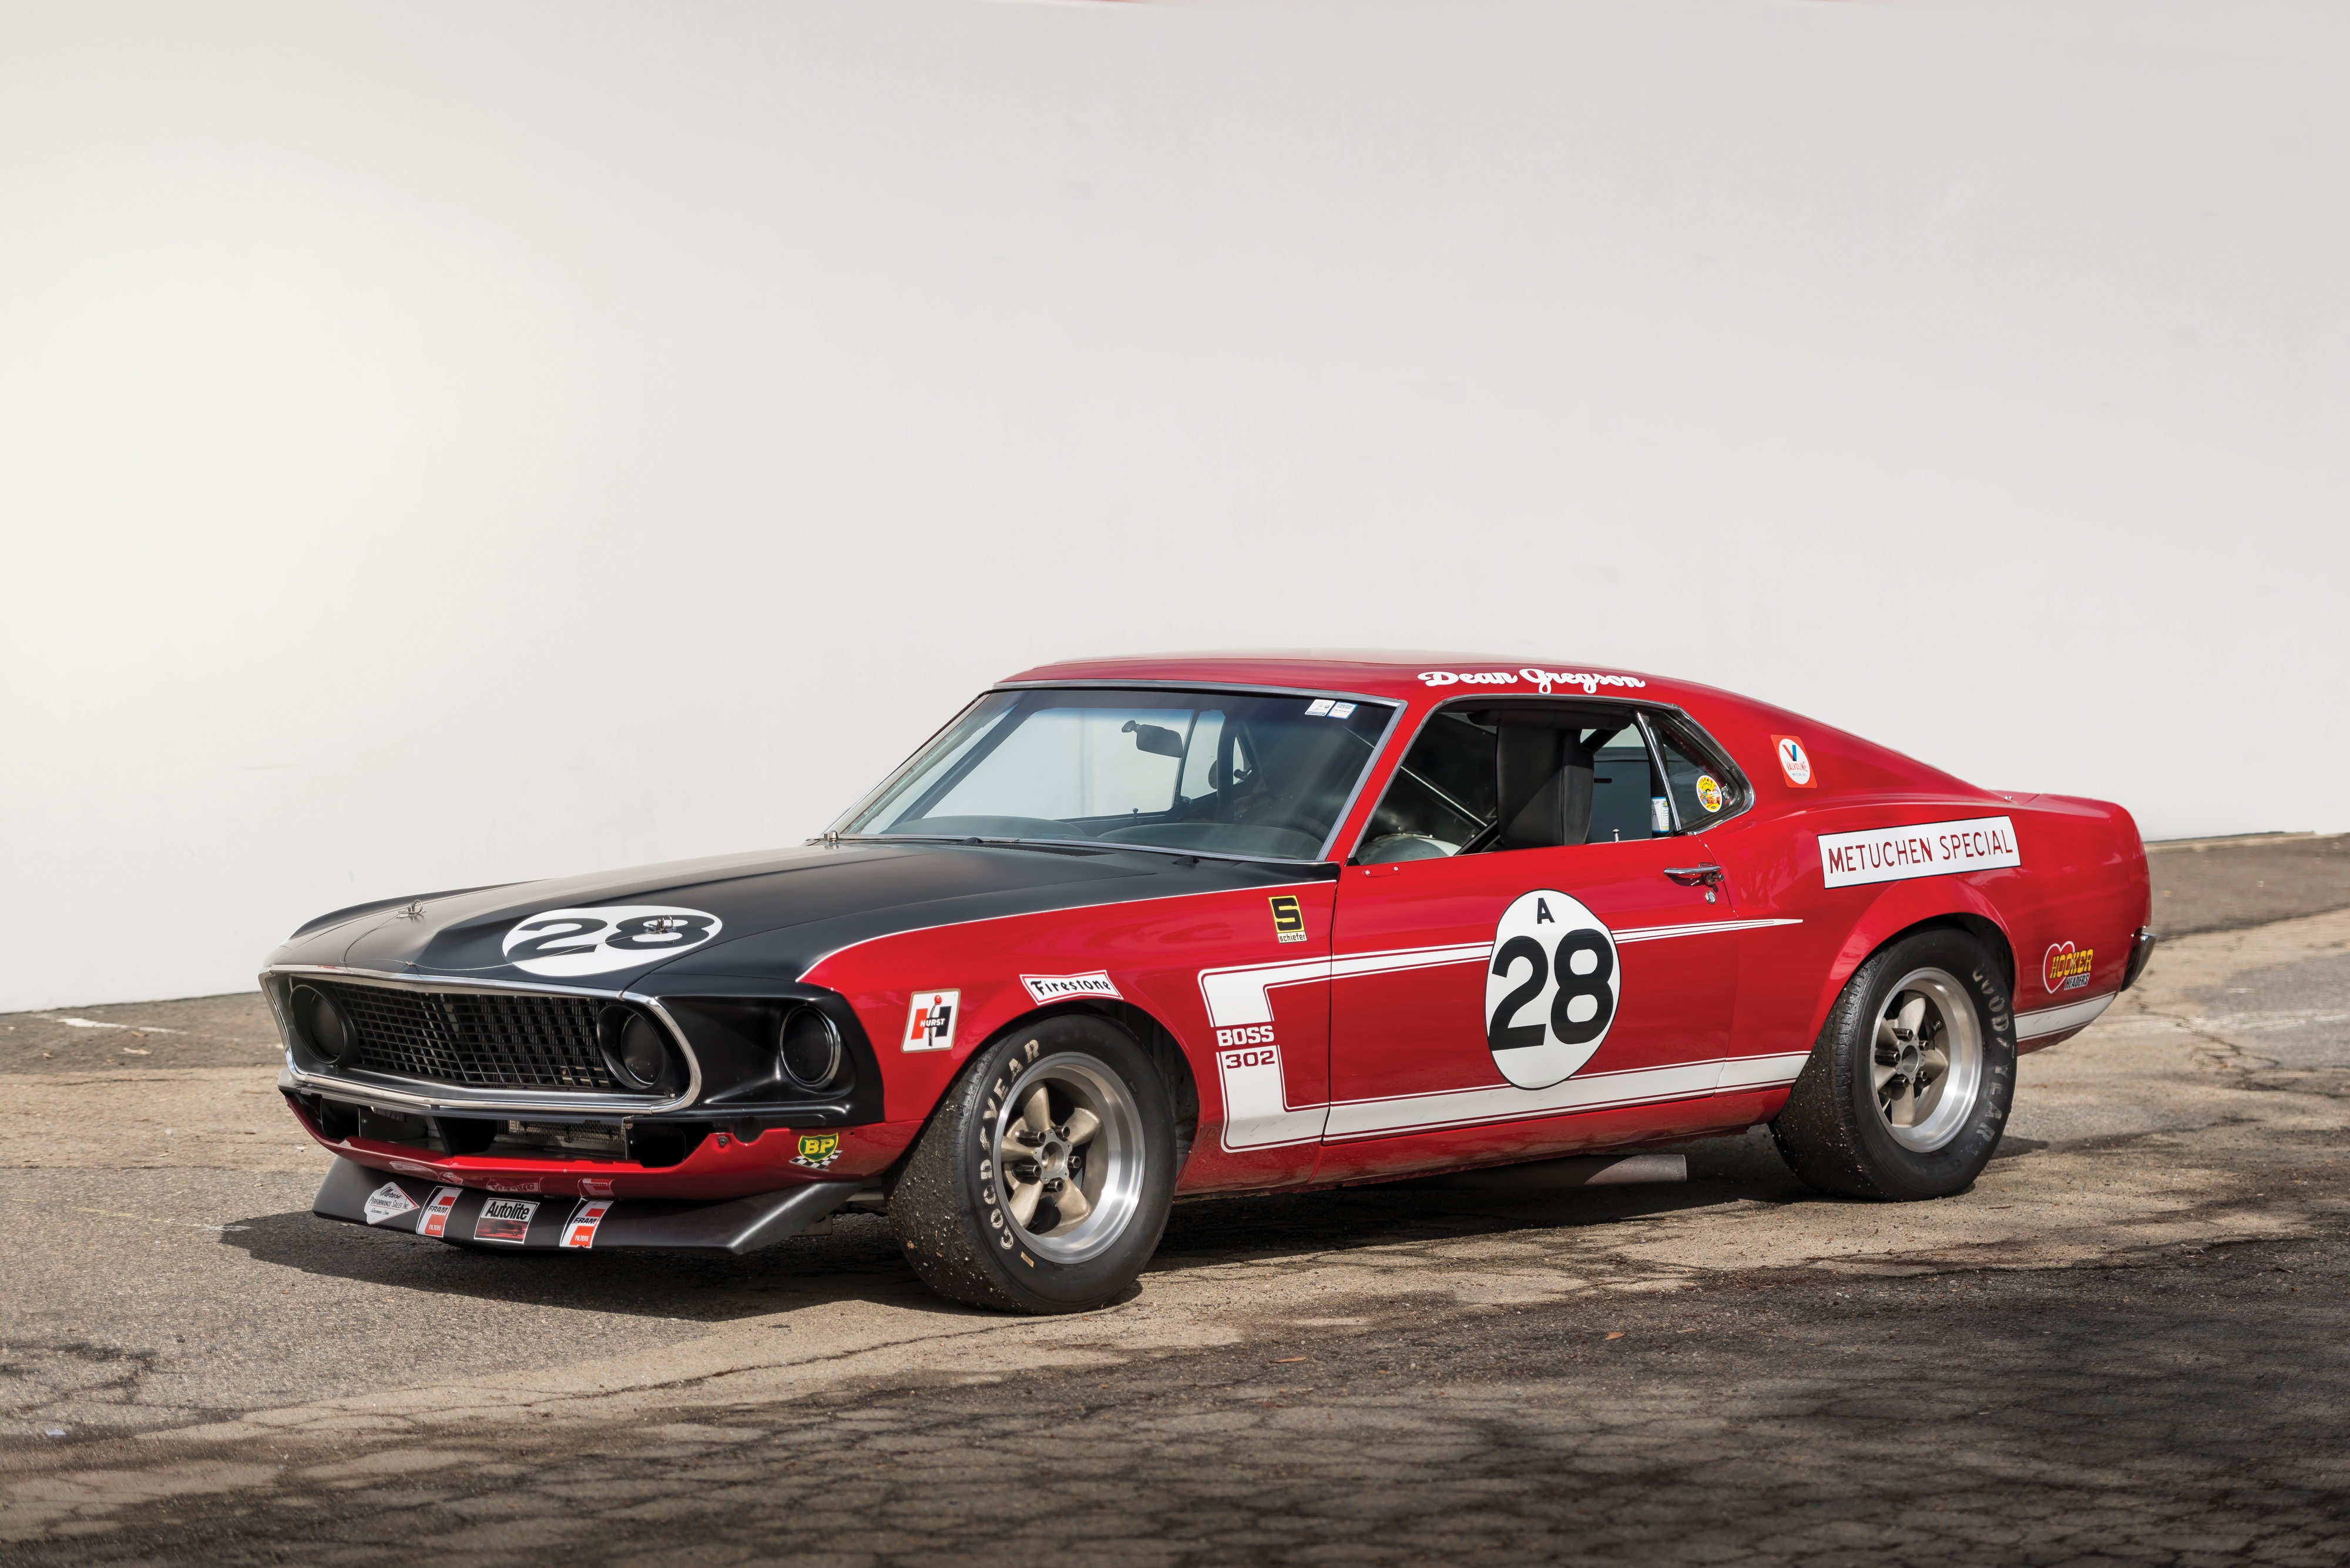 ford, race car, ford mustang boss 302, ford mustang Car Cellphone FHD pic